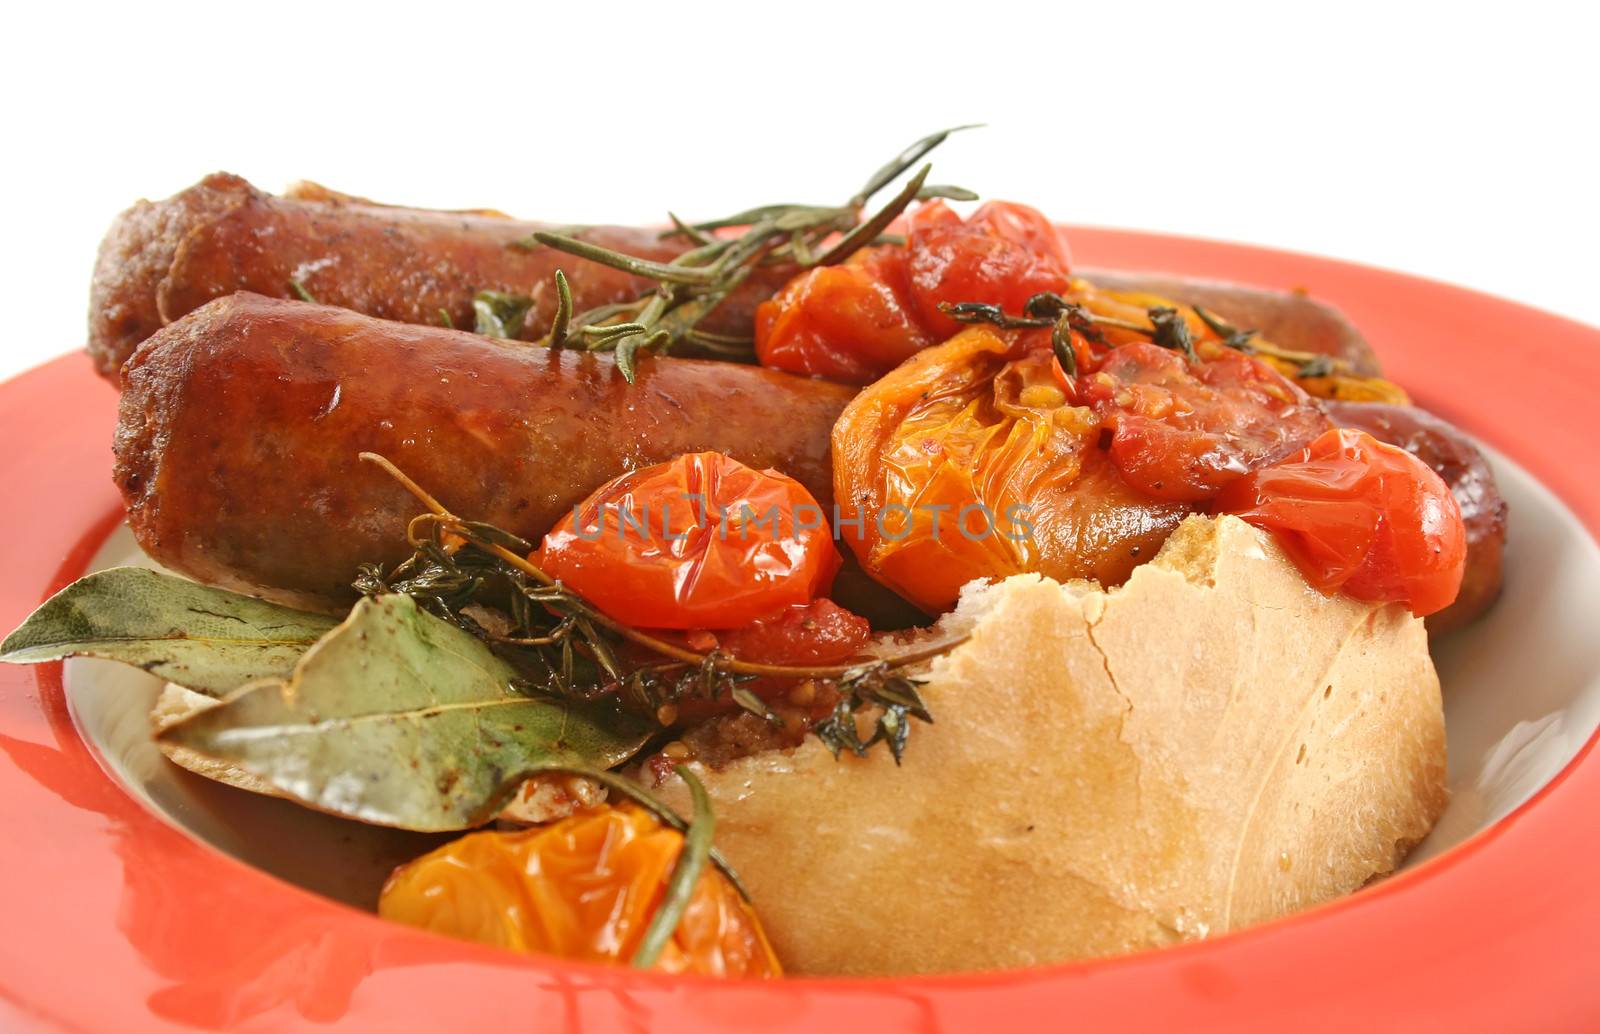 Baked Tomato And Sausages by jabiru